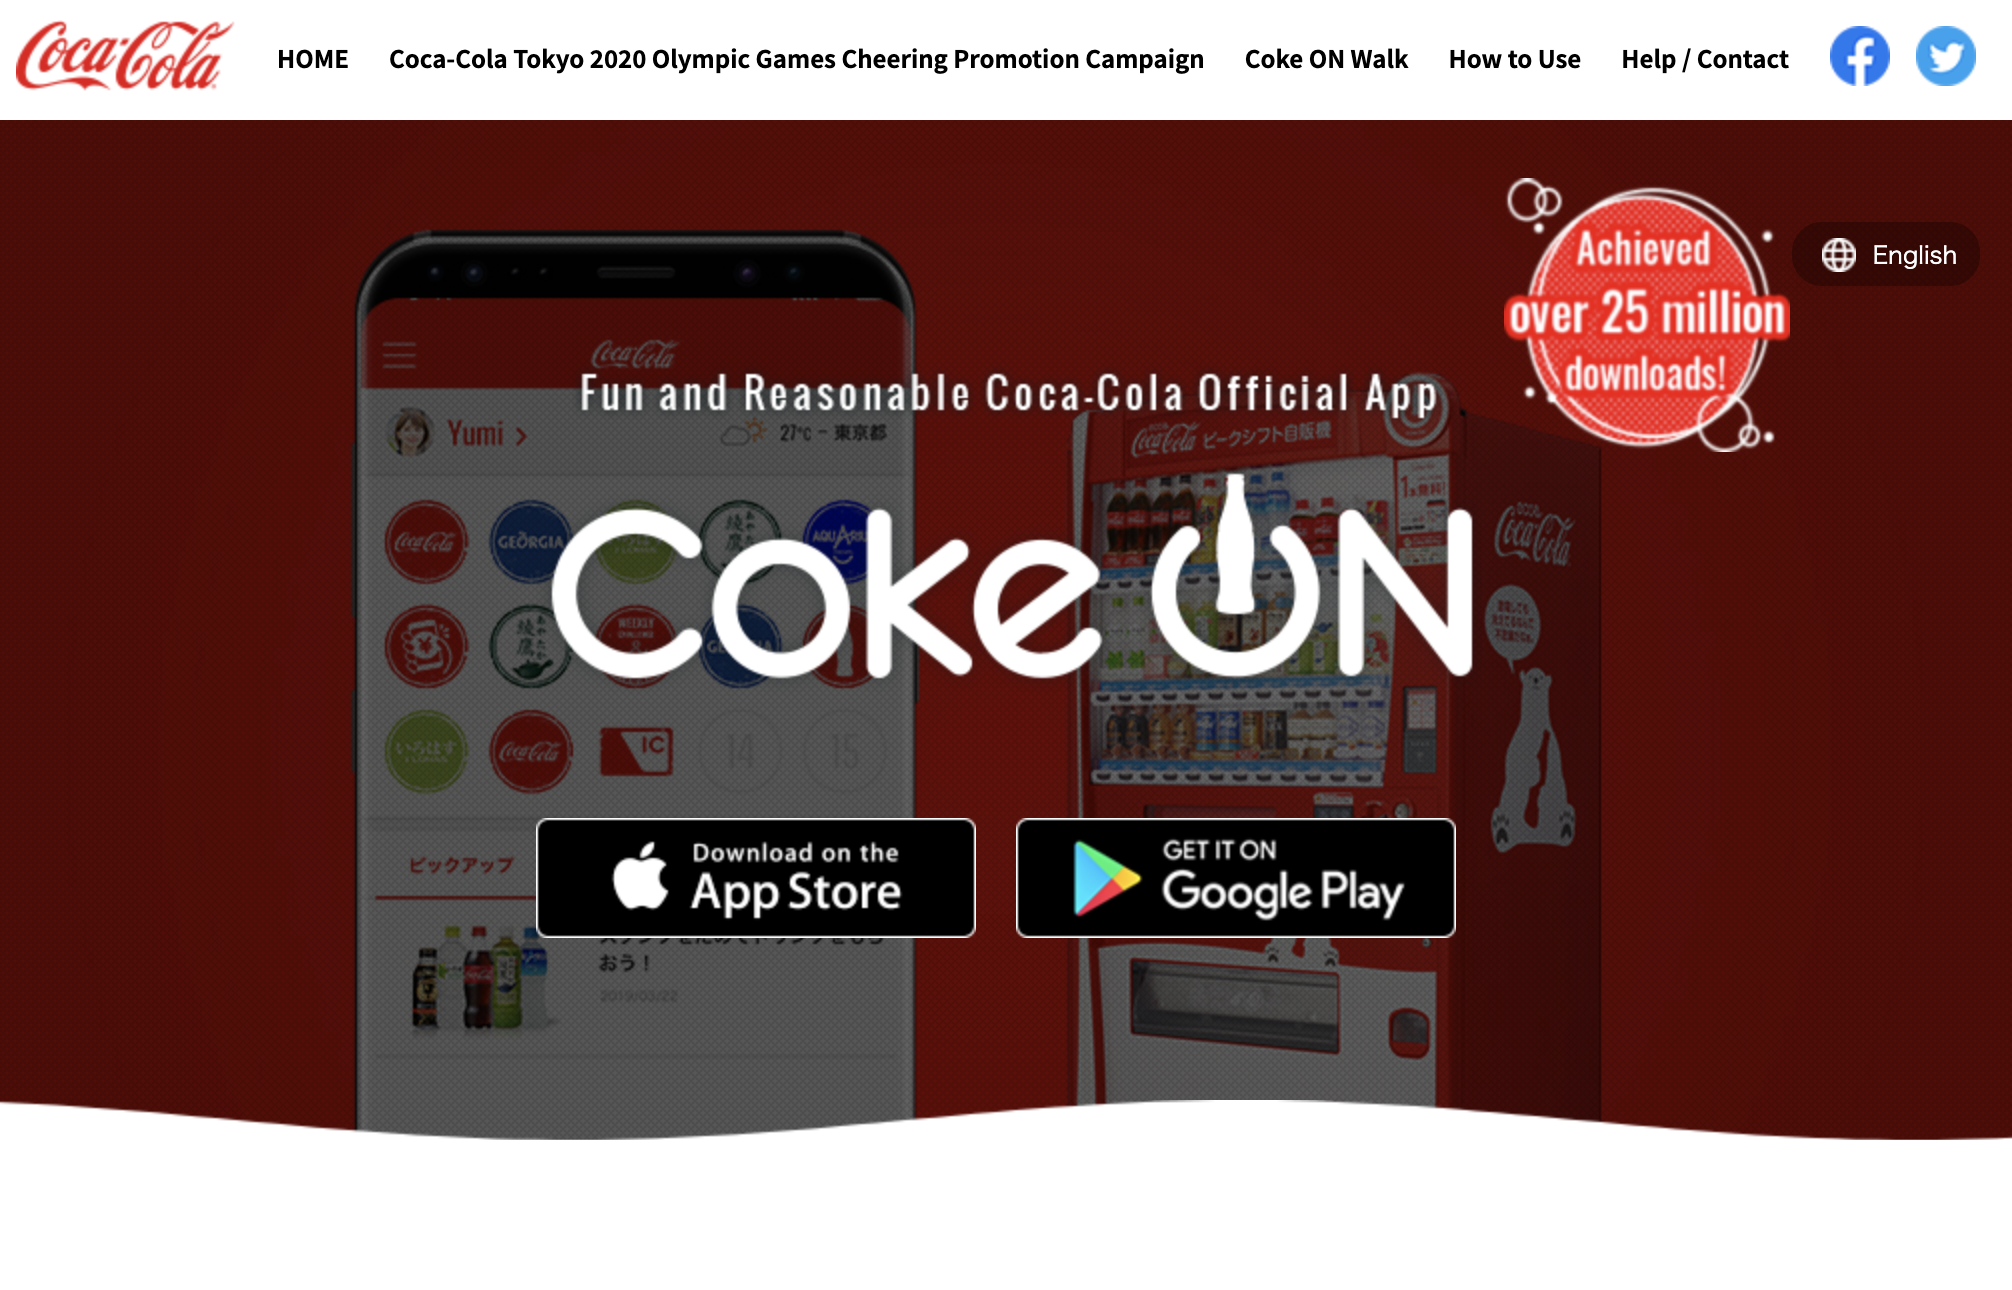 Coke ON, the fun and reasonable Coca-Cola official app (source: https://c.cocacola.co.jp/app/)